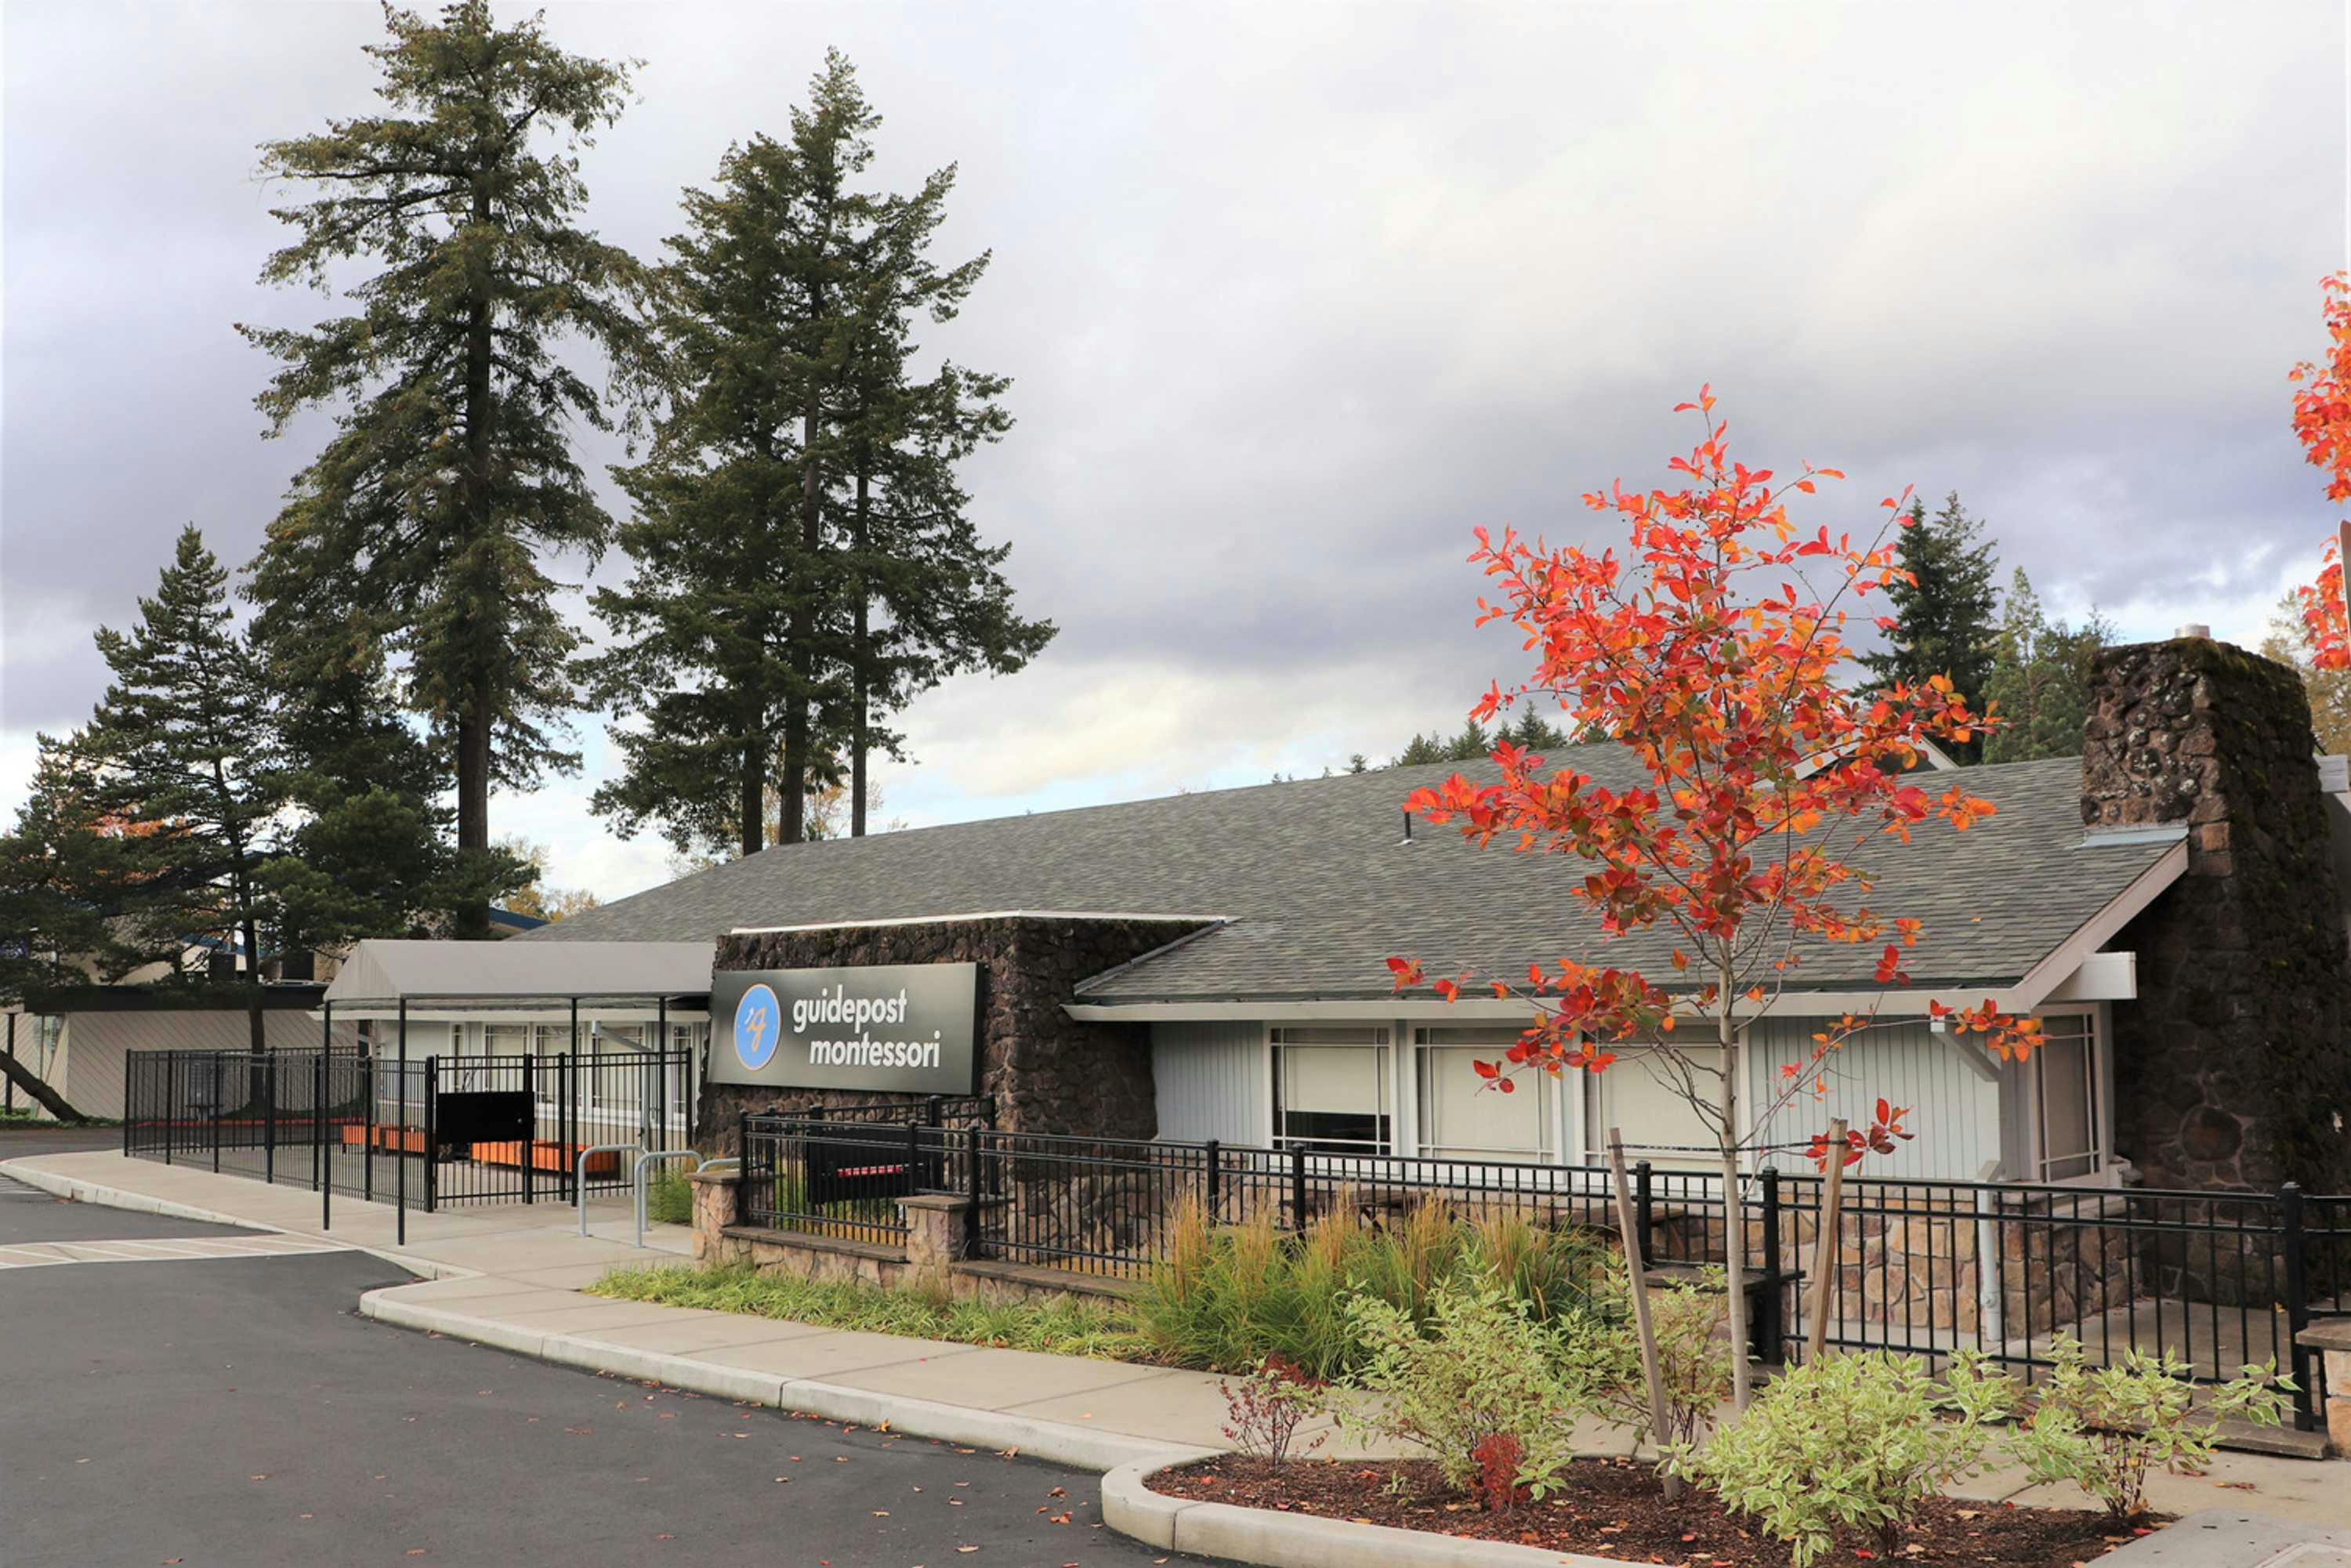 View of Guidepost Montessori at Beaverton from the parking lot showing the fenced in campus with its towering trees in the background, a branded Guidepost Montessori sign, and a tree with red and orange leaves in fall time.